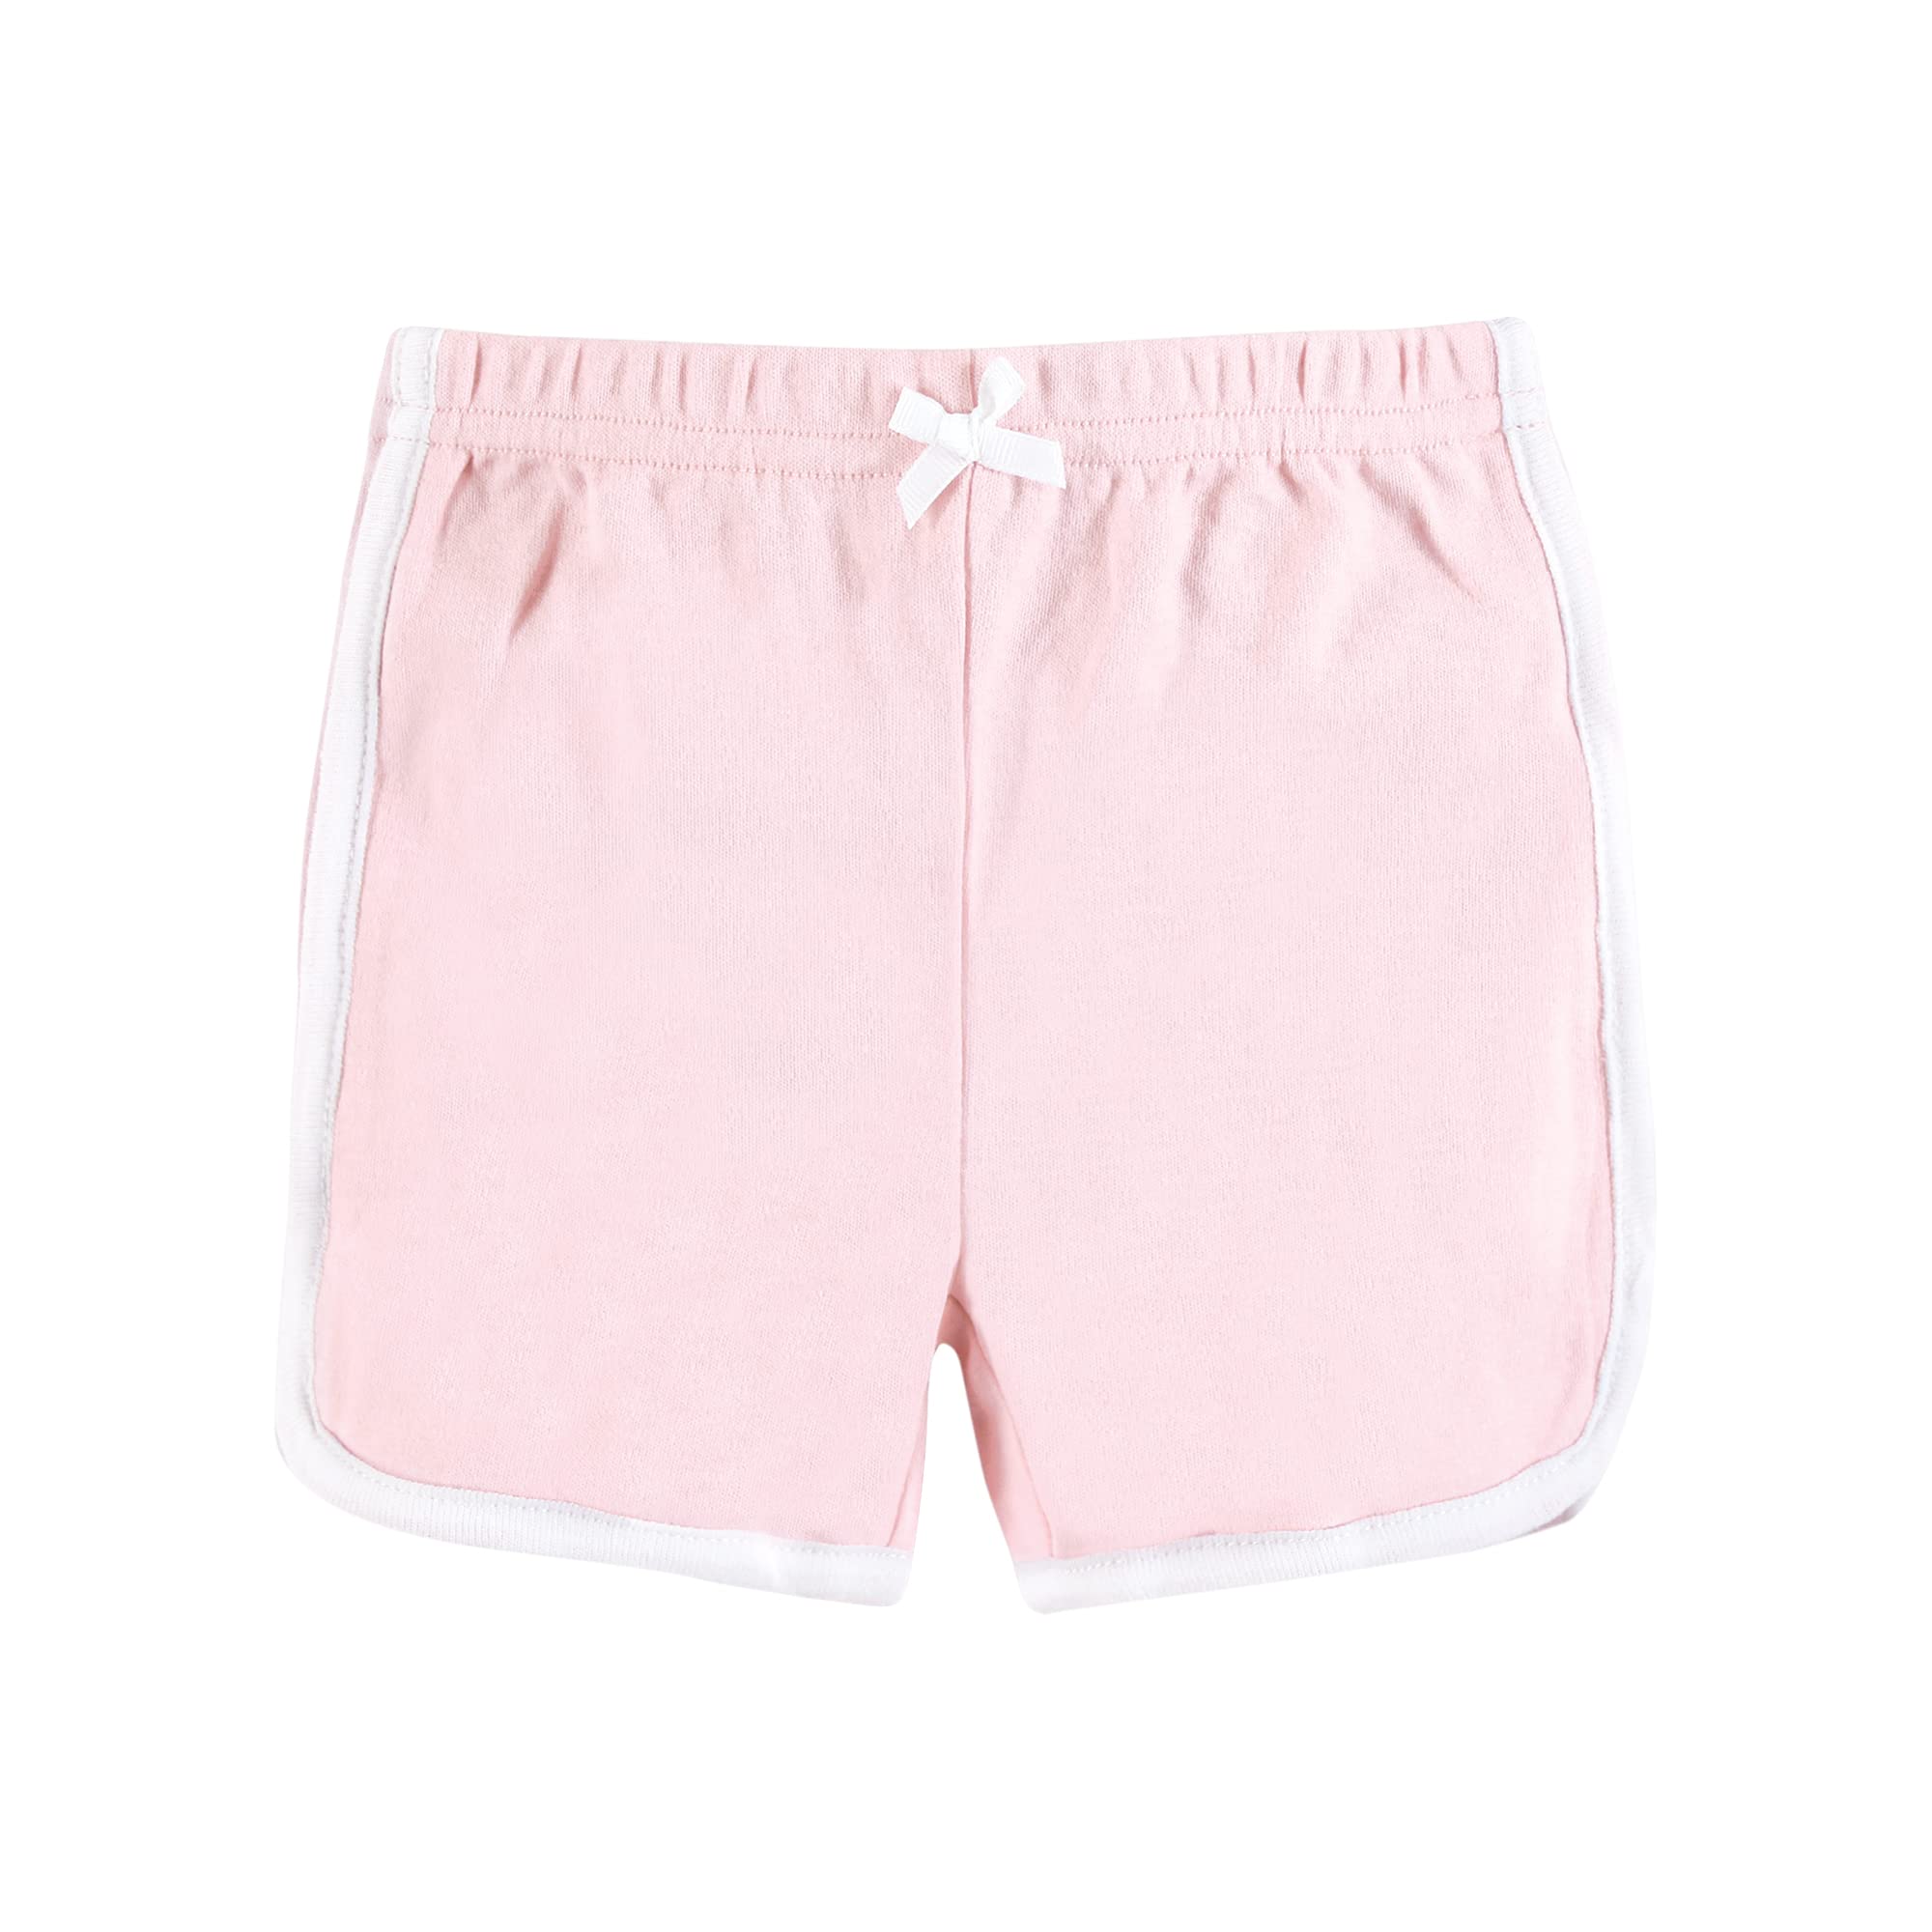 Hudson Baby Unisex Baby and Toddler Shorts Bottoms 4-Pack, Pink White, 0-3 Months